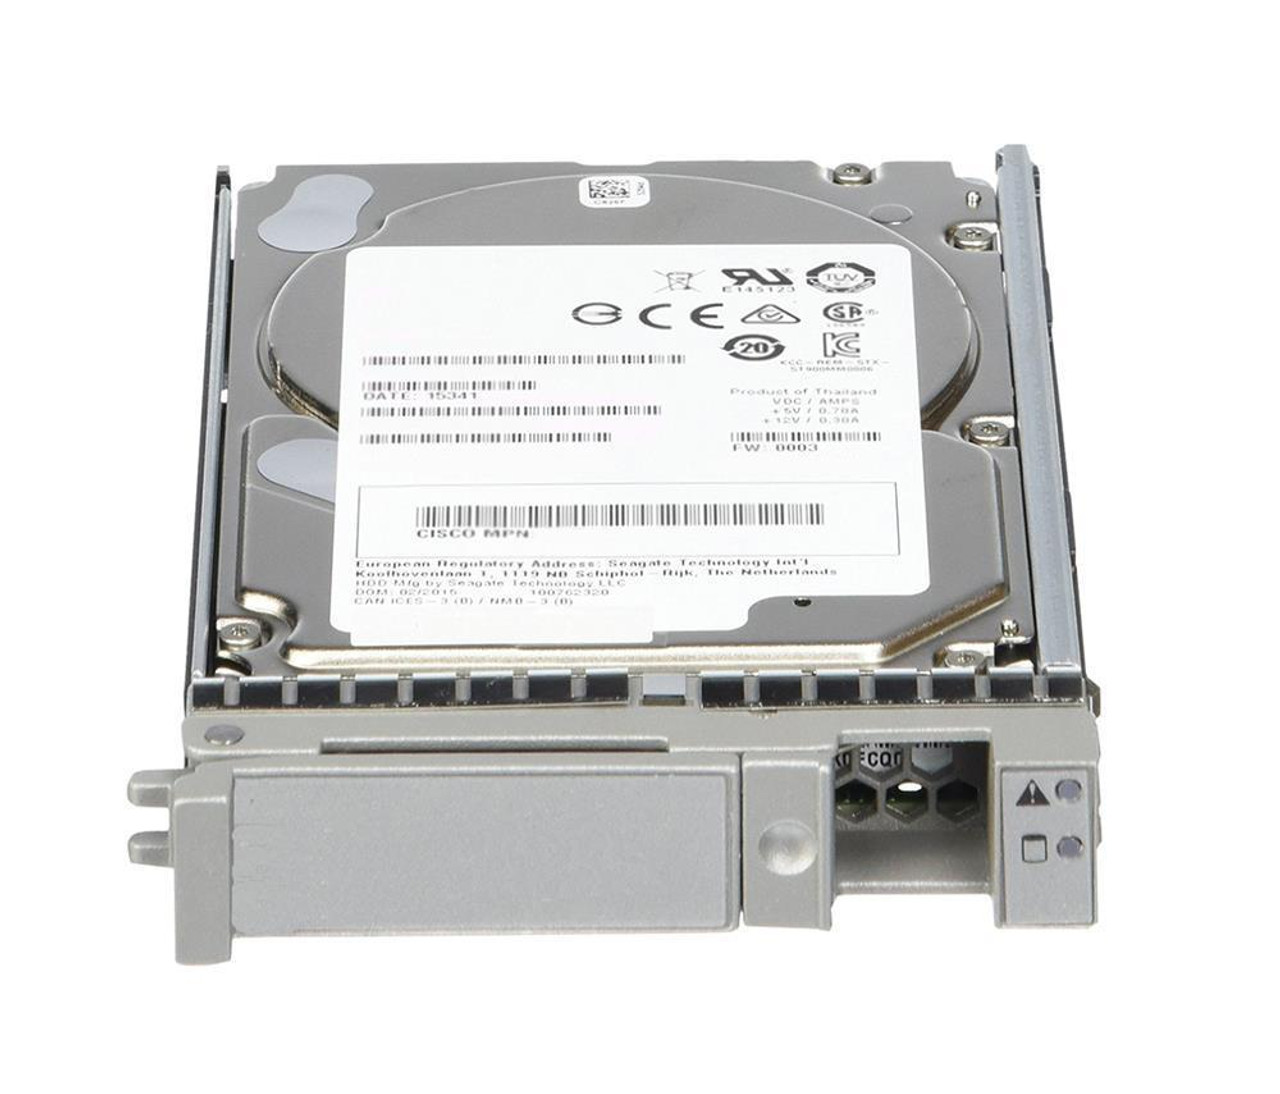 Cisco 14TB 7200RPM SAS 12Gbps 3.5-inch Internal Hard Drive with Carrier Top Load